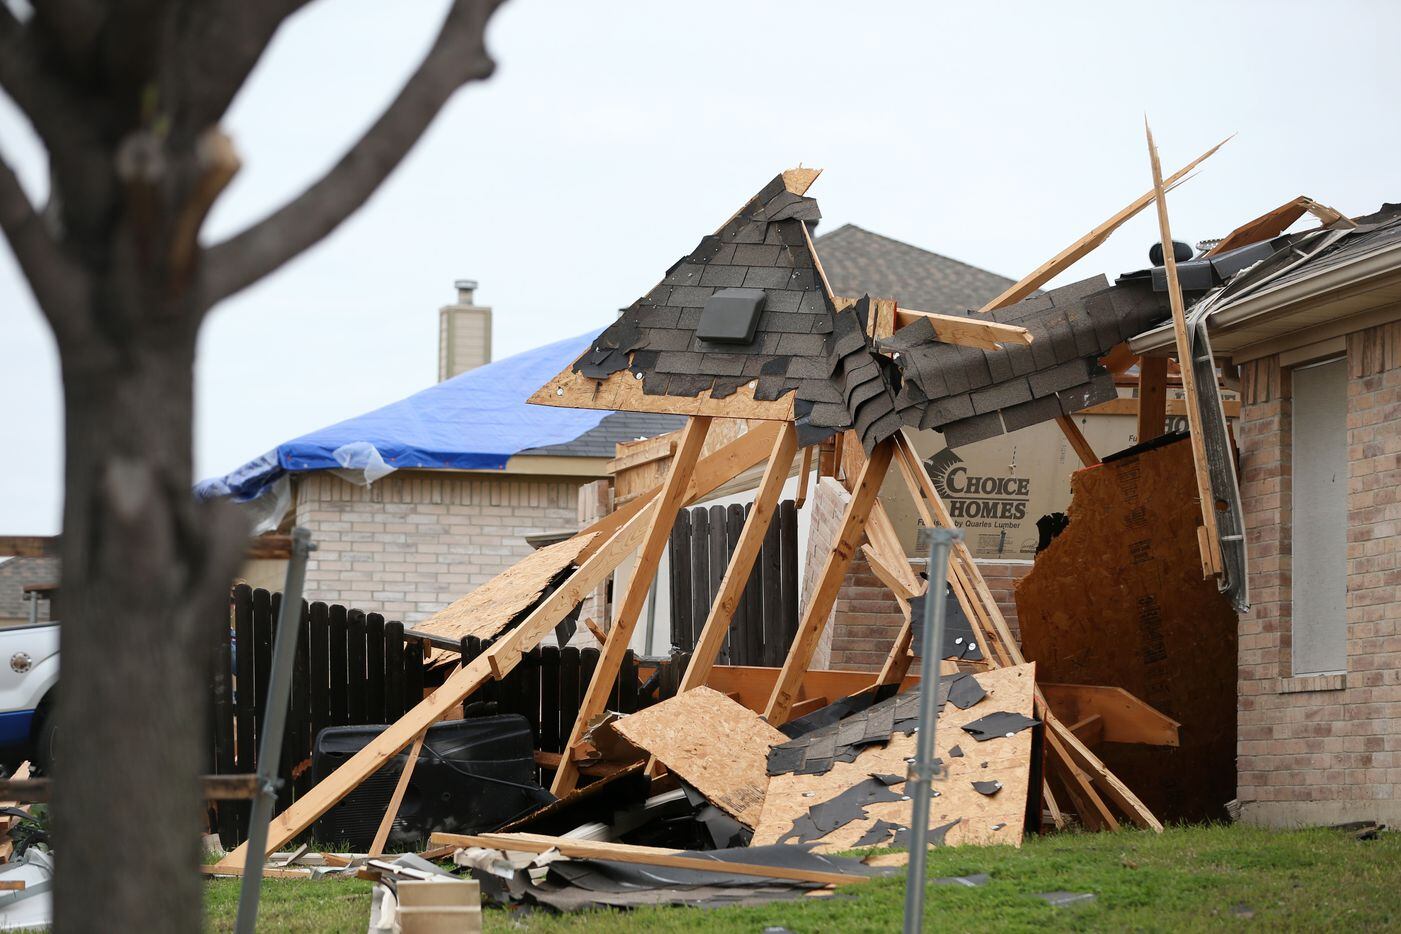 A tornado-damaged home in the 1500 block of Allen Drive in a Mesquite neighborhood  on Monday, March 11, 2019. The EF-0 twister, packing winds of 75 to 85 mph, wreaked havoc when it touched down around 7:30 a.m. Saturday.